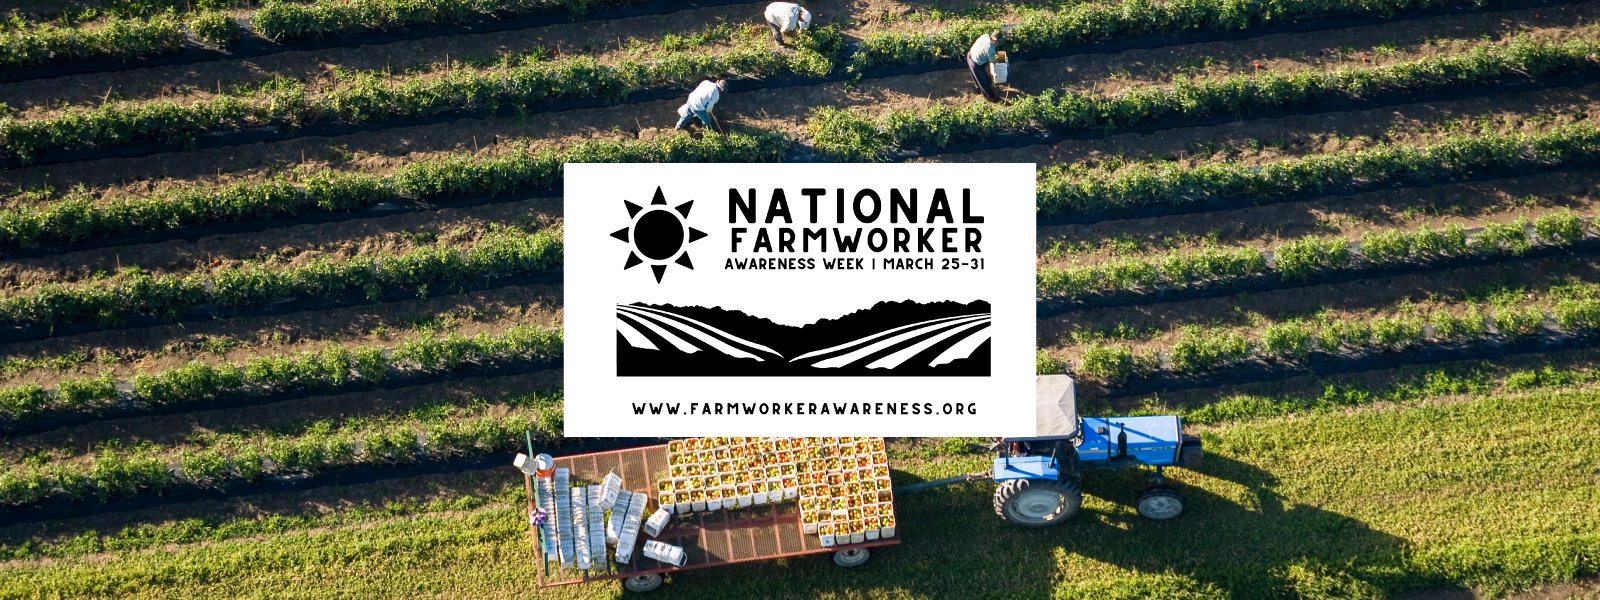 A picture of a farm field with a logo for National Farmworker Awareness Week in the middle